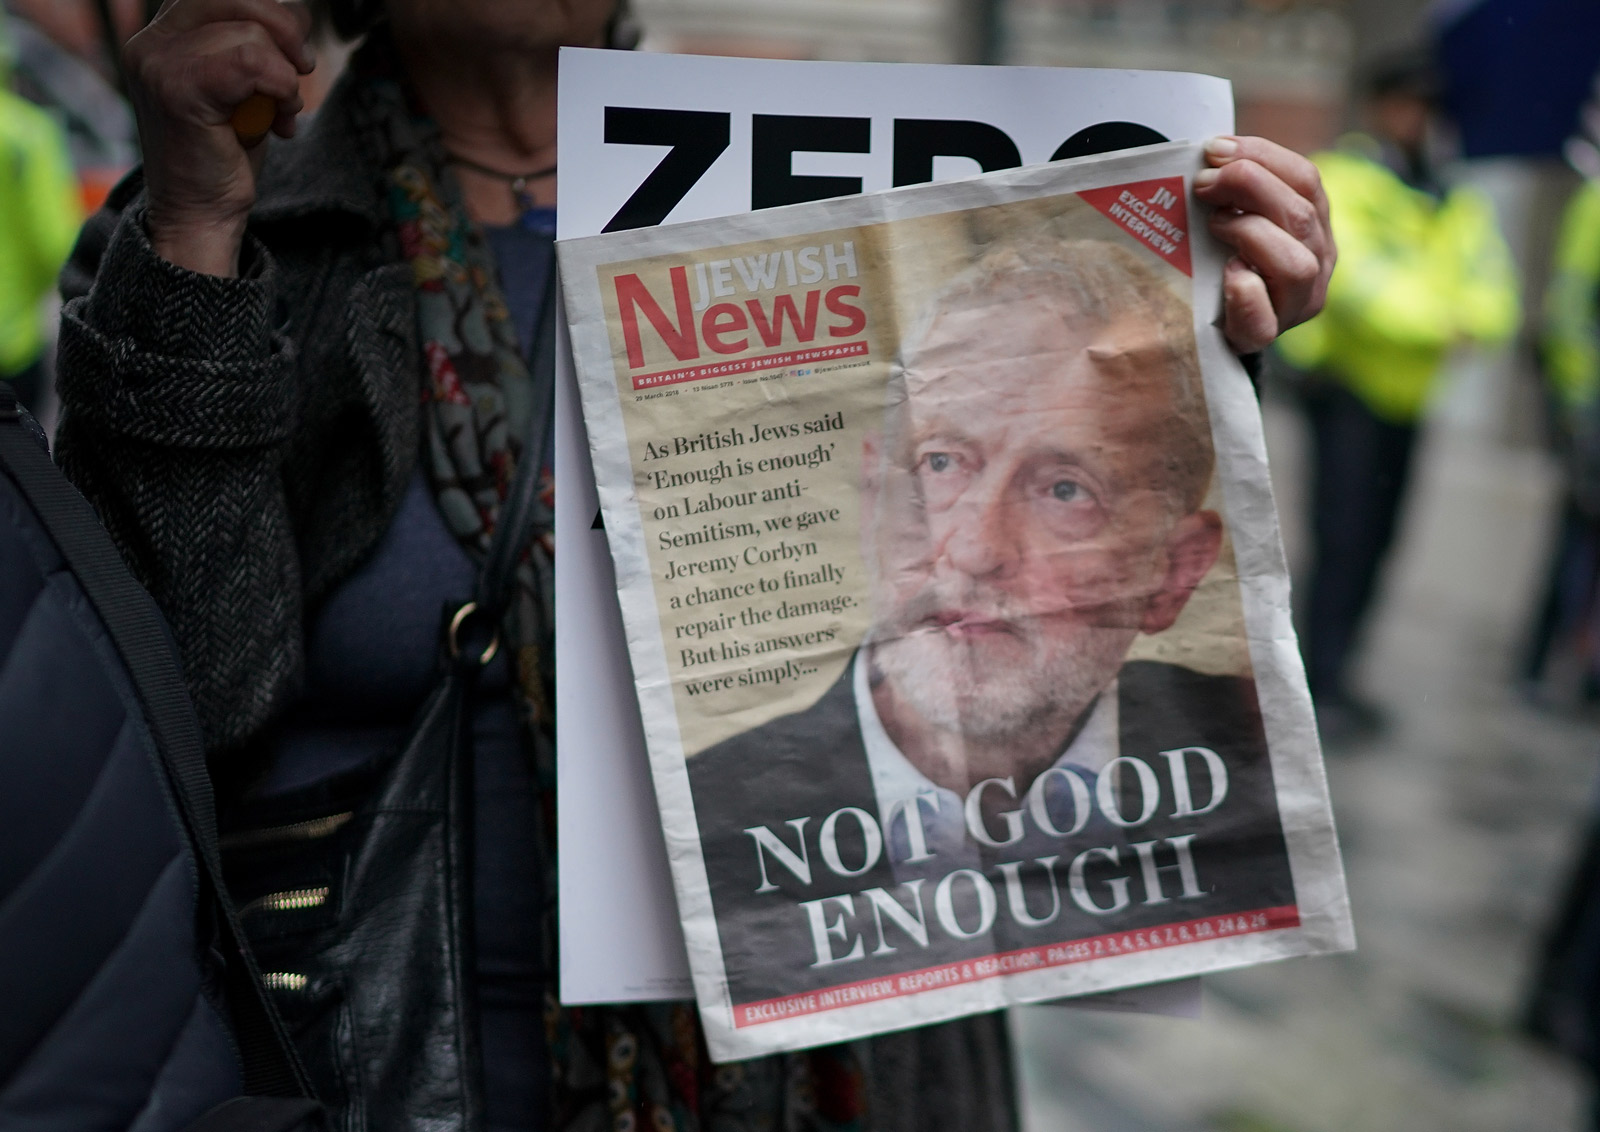 A Campaign Against Antisemitism protester outside the Labour Party headquarters, London, April 8, 2018